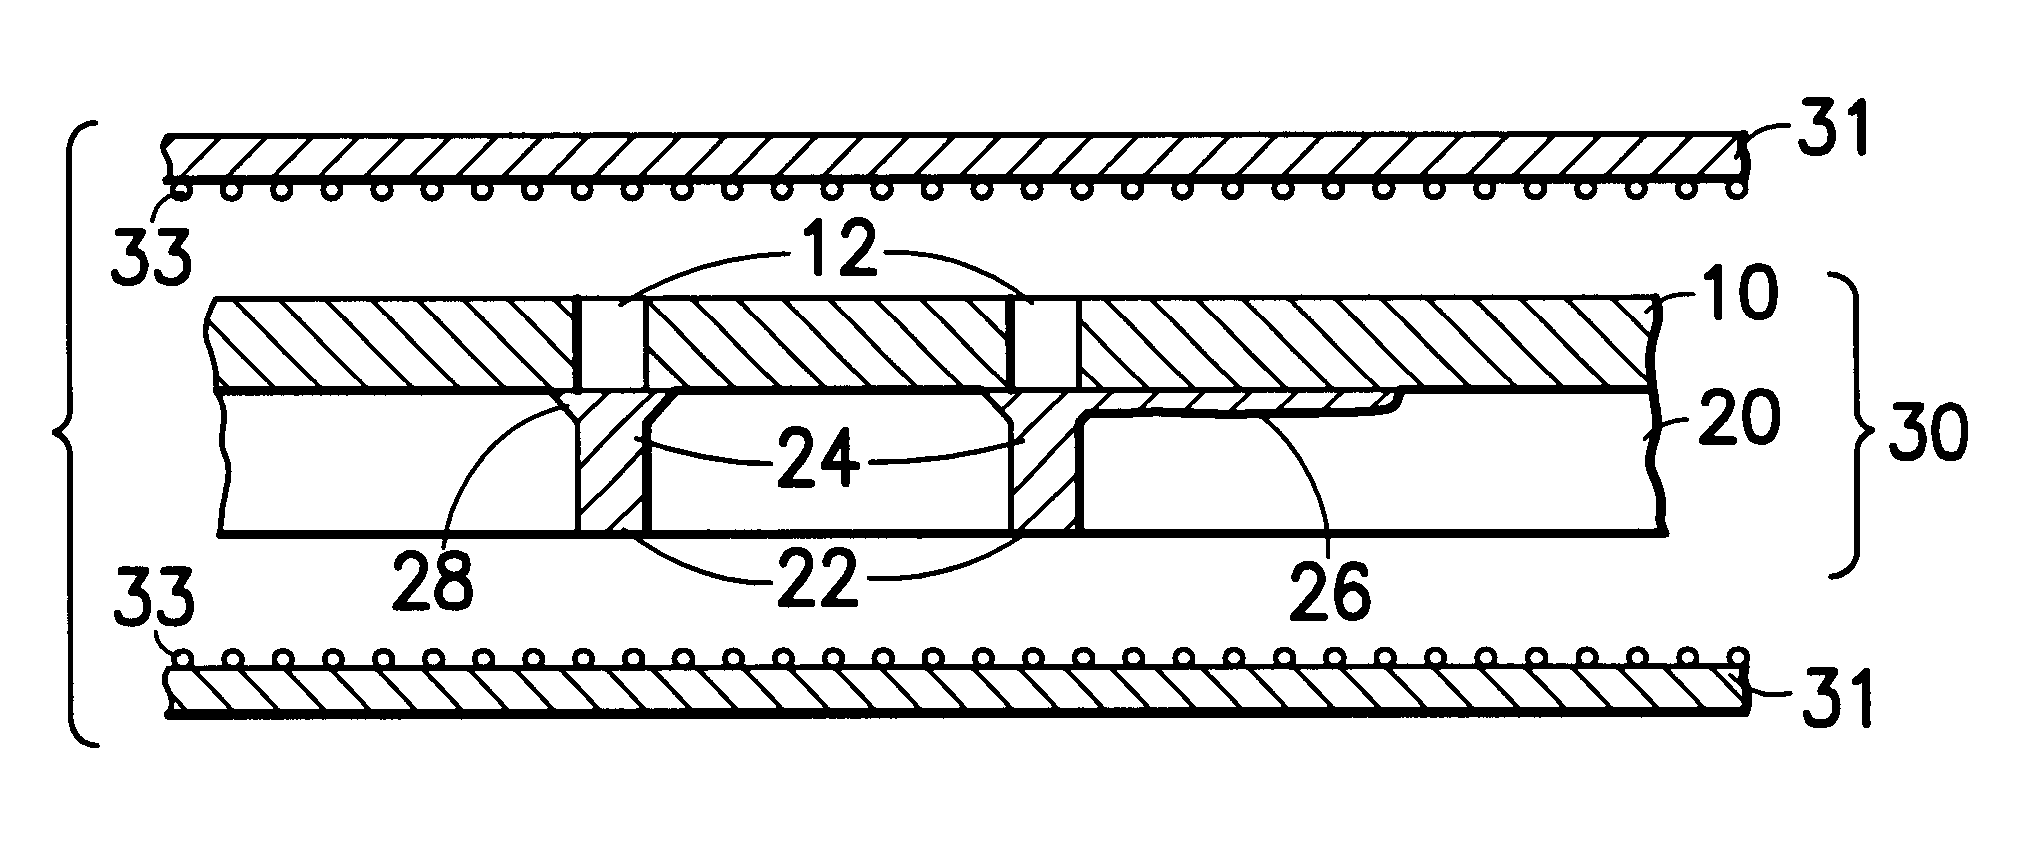 Multi-thickness, multi-layer green sheet processing